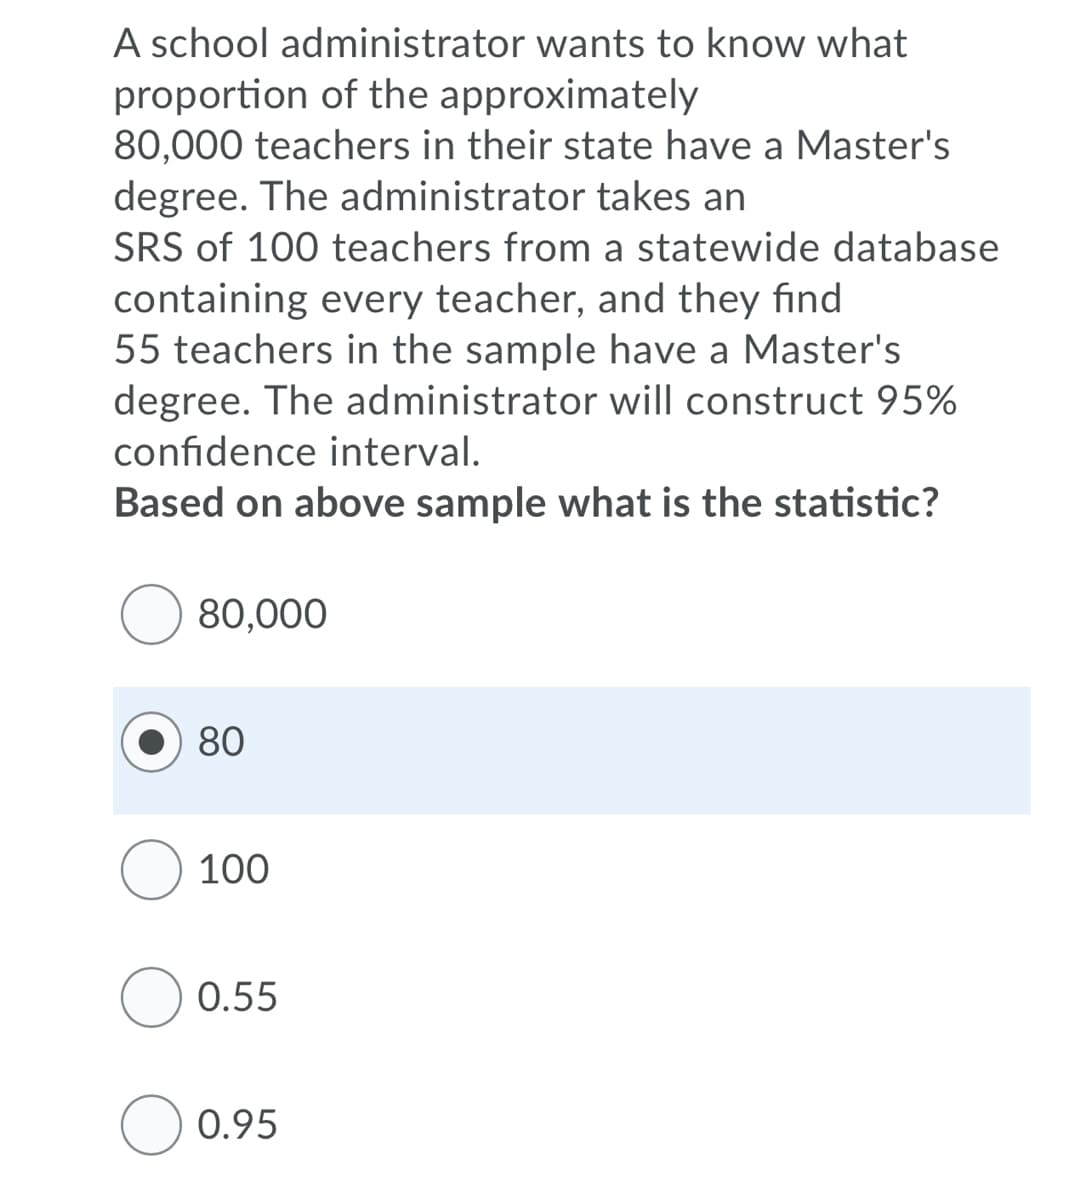 A school administrator wants to know what
proportion of the approximately
80,000 teachers in their state have a Master's
degree. The administrator takes an
SRS of 100 teachers from a statewide database
containing every teacher, and they find
55 teachers in the sample have a Master's
degree. The administrator will construct 95%
confidence interval.
Based on above sample what is the statistic?
80,000
80
100
O 0.55
O 0.95
